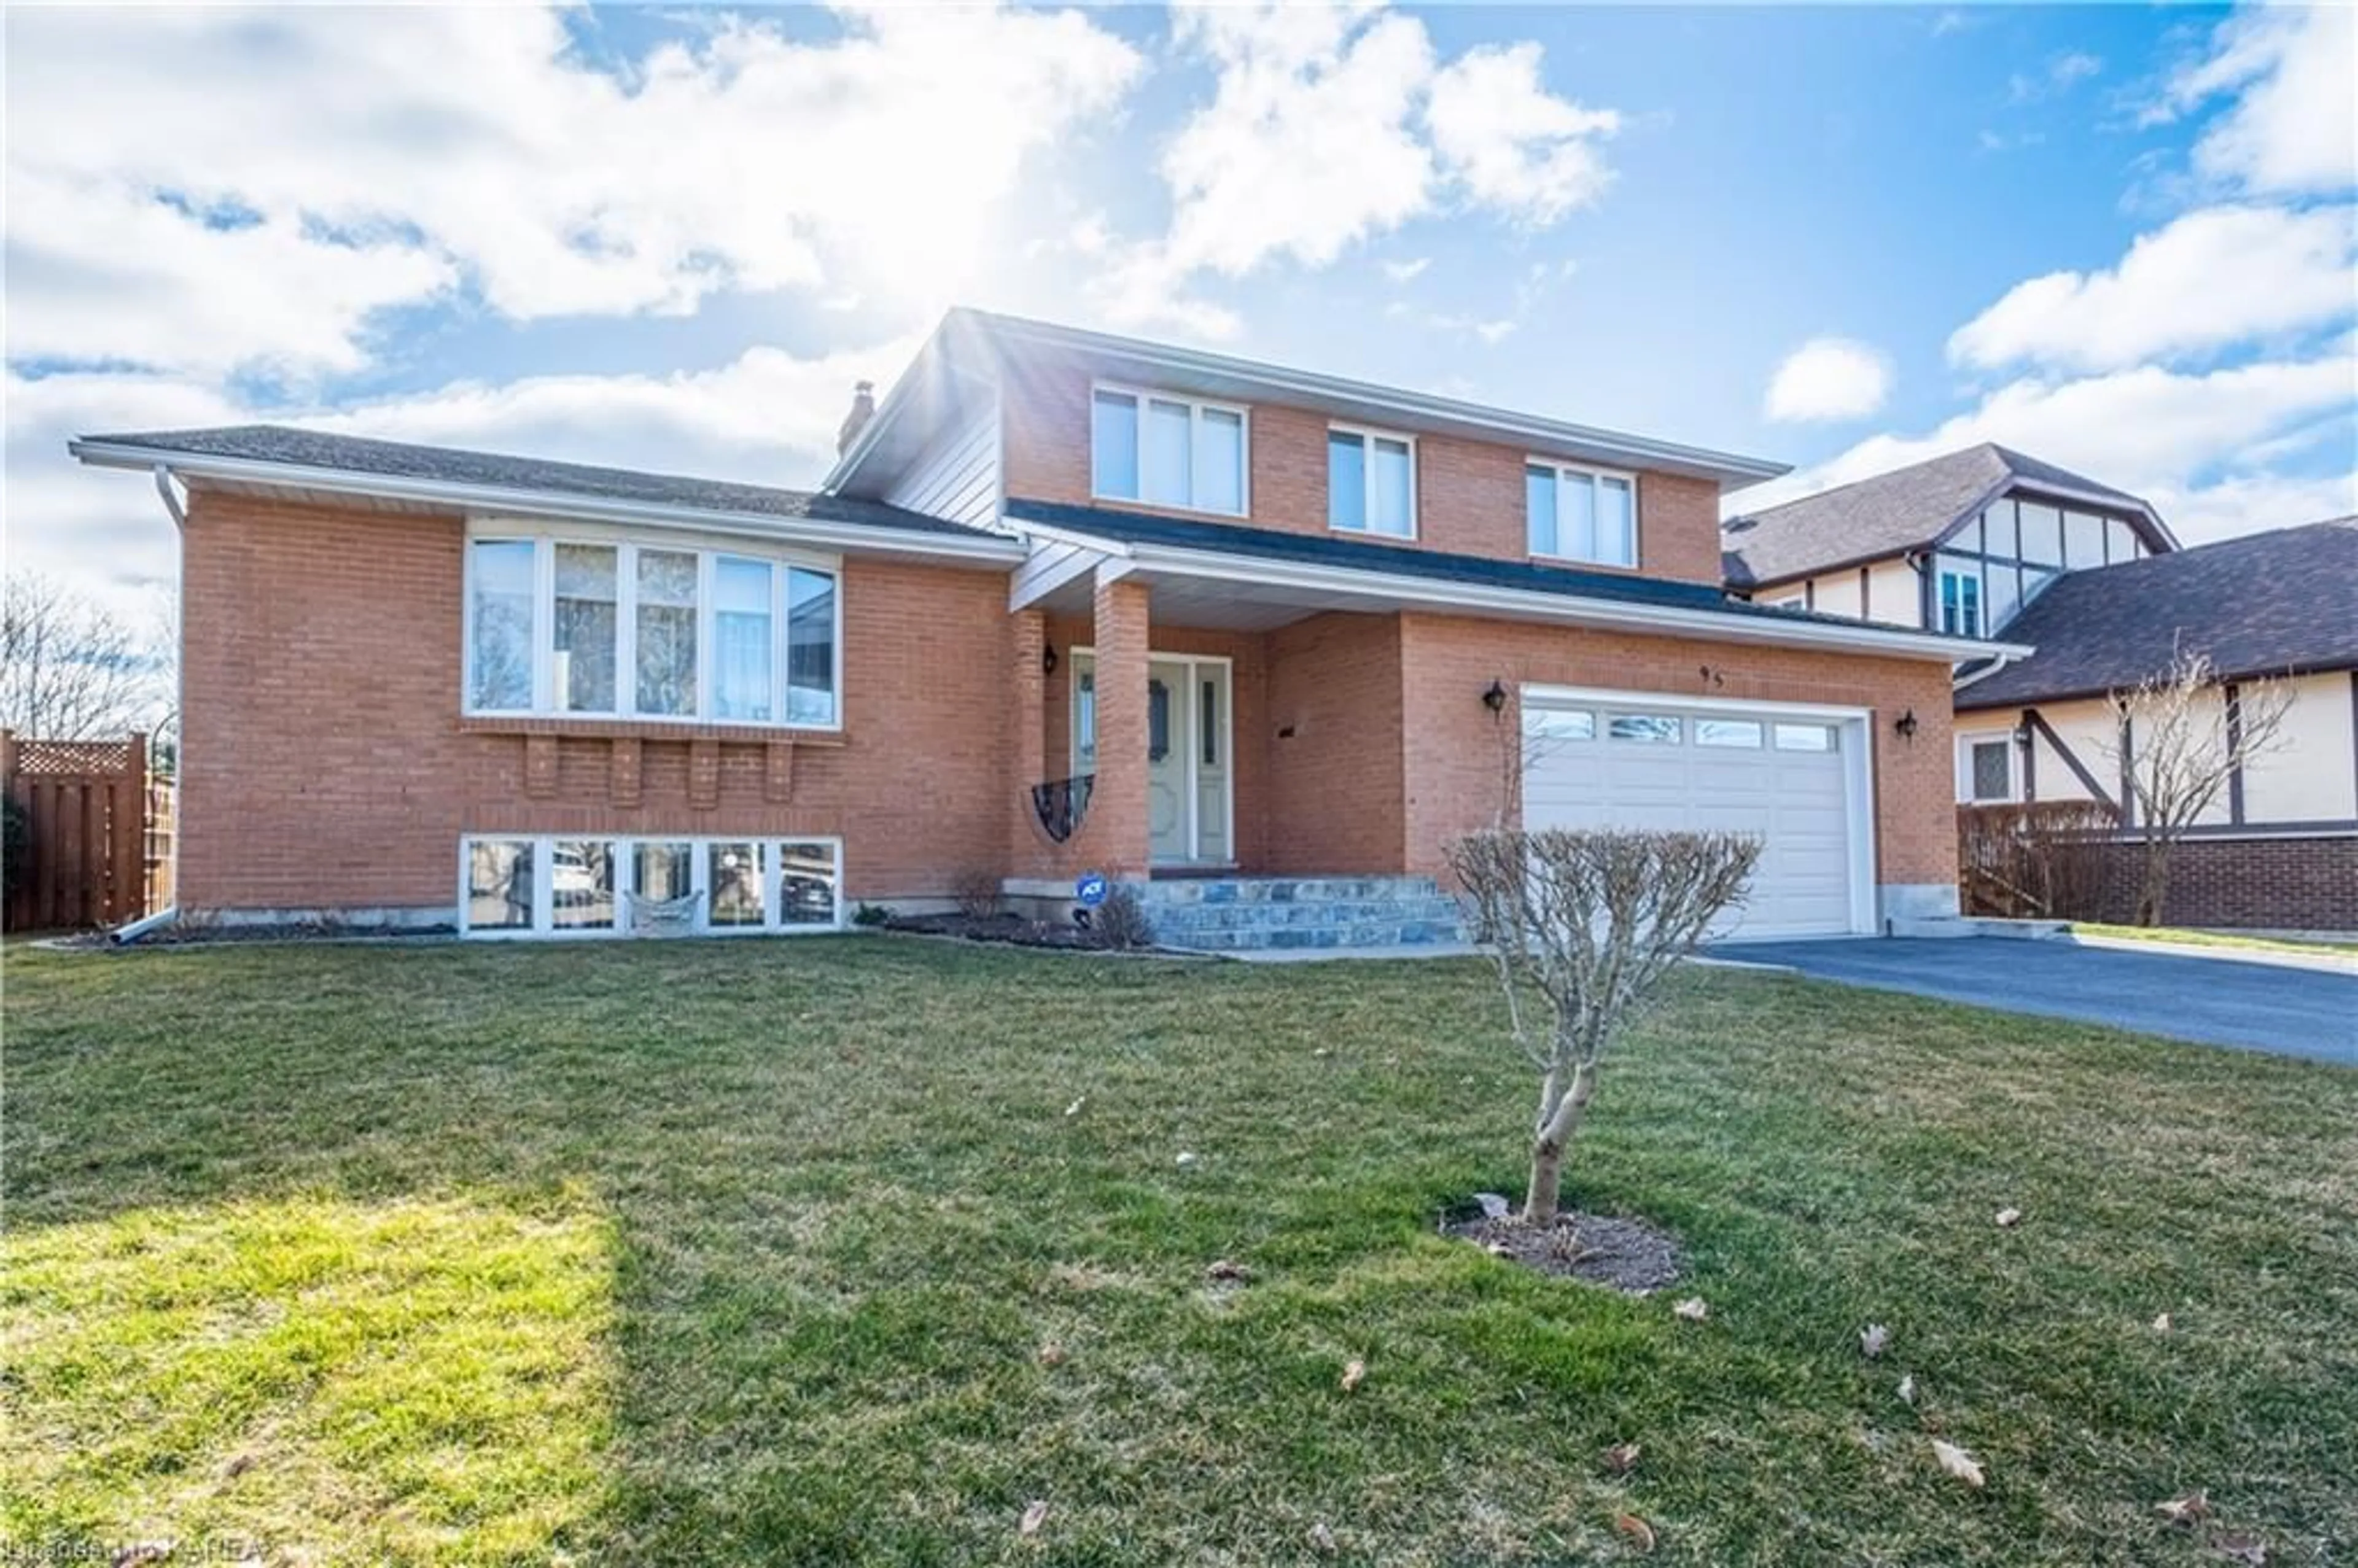 Home with brick exterior material for 95 Lakeshore Blvd, Kingston Ontario K7M 6R4